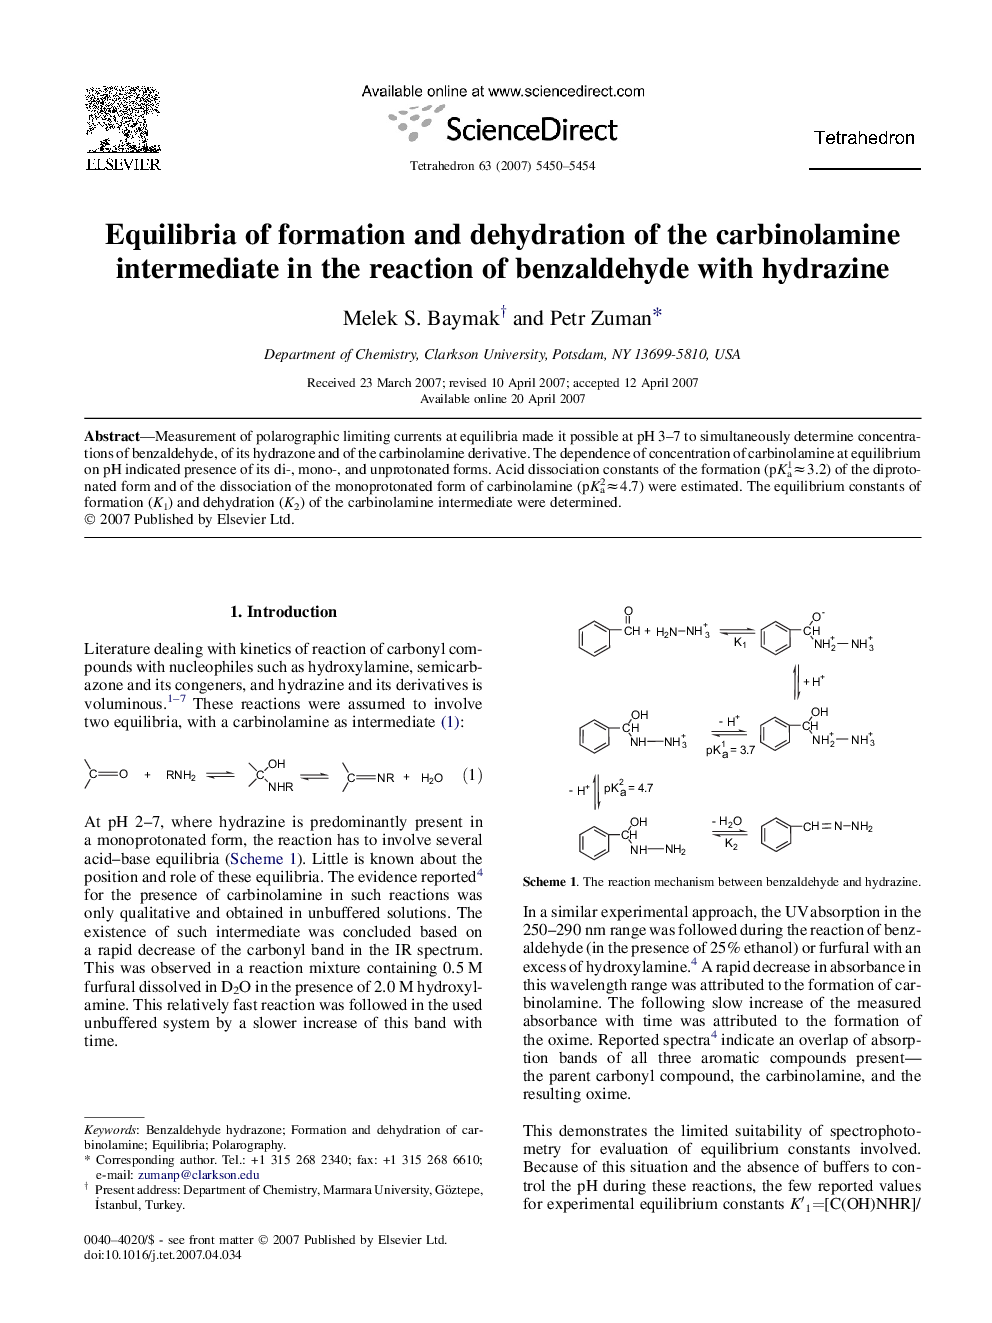 Equilibria of formation and dehydration of the carbinolamine intermediate in the reaction of benzaldehyde with hydrazine